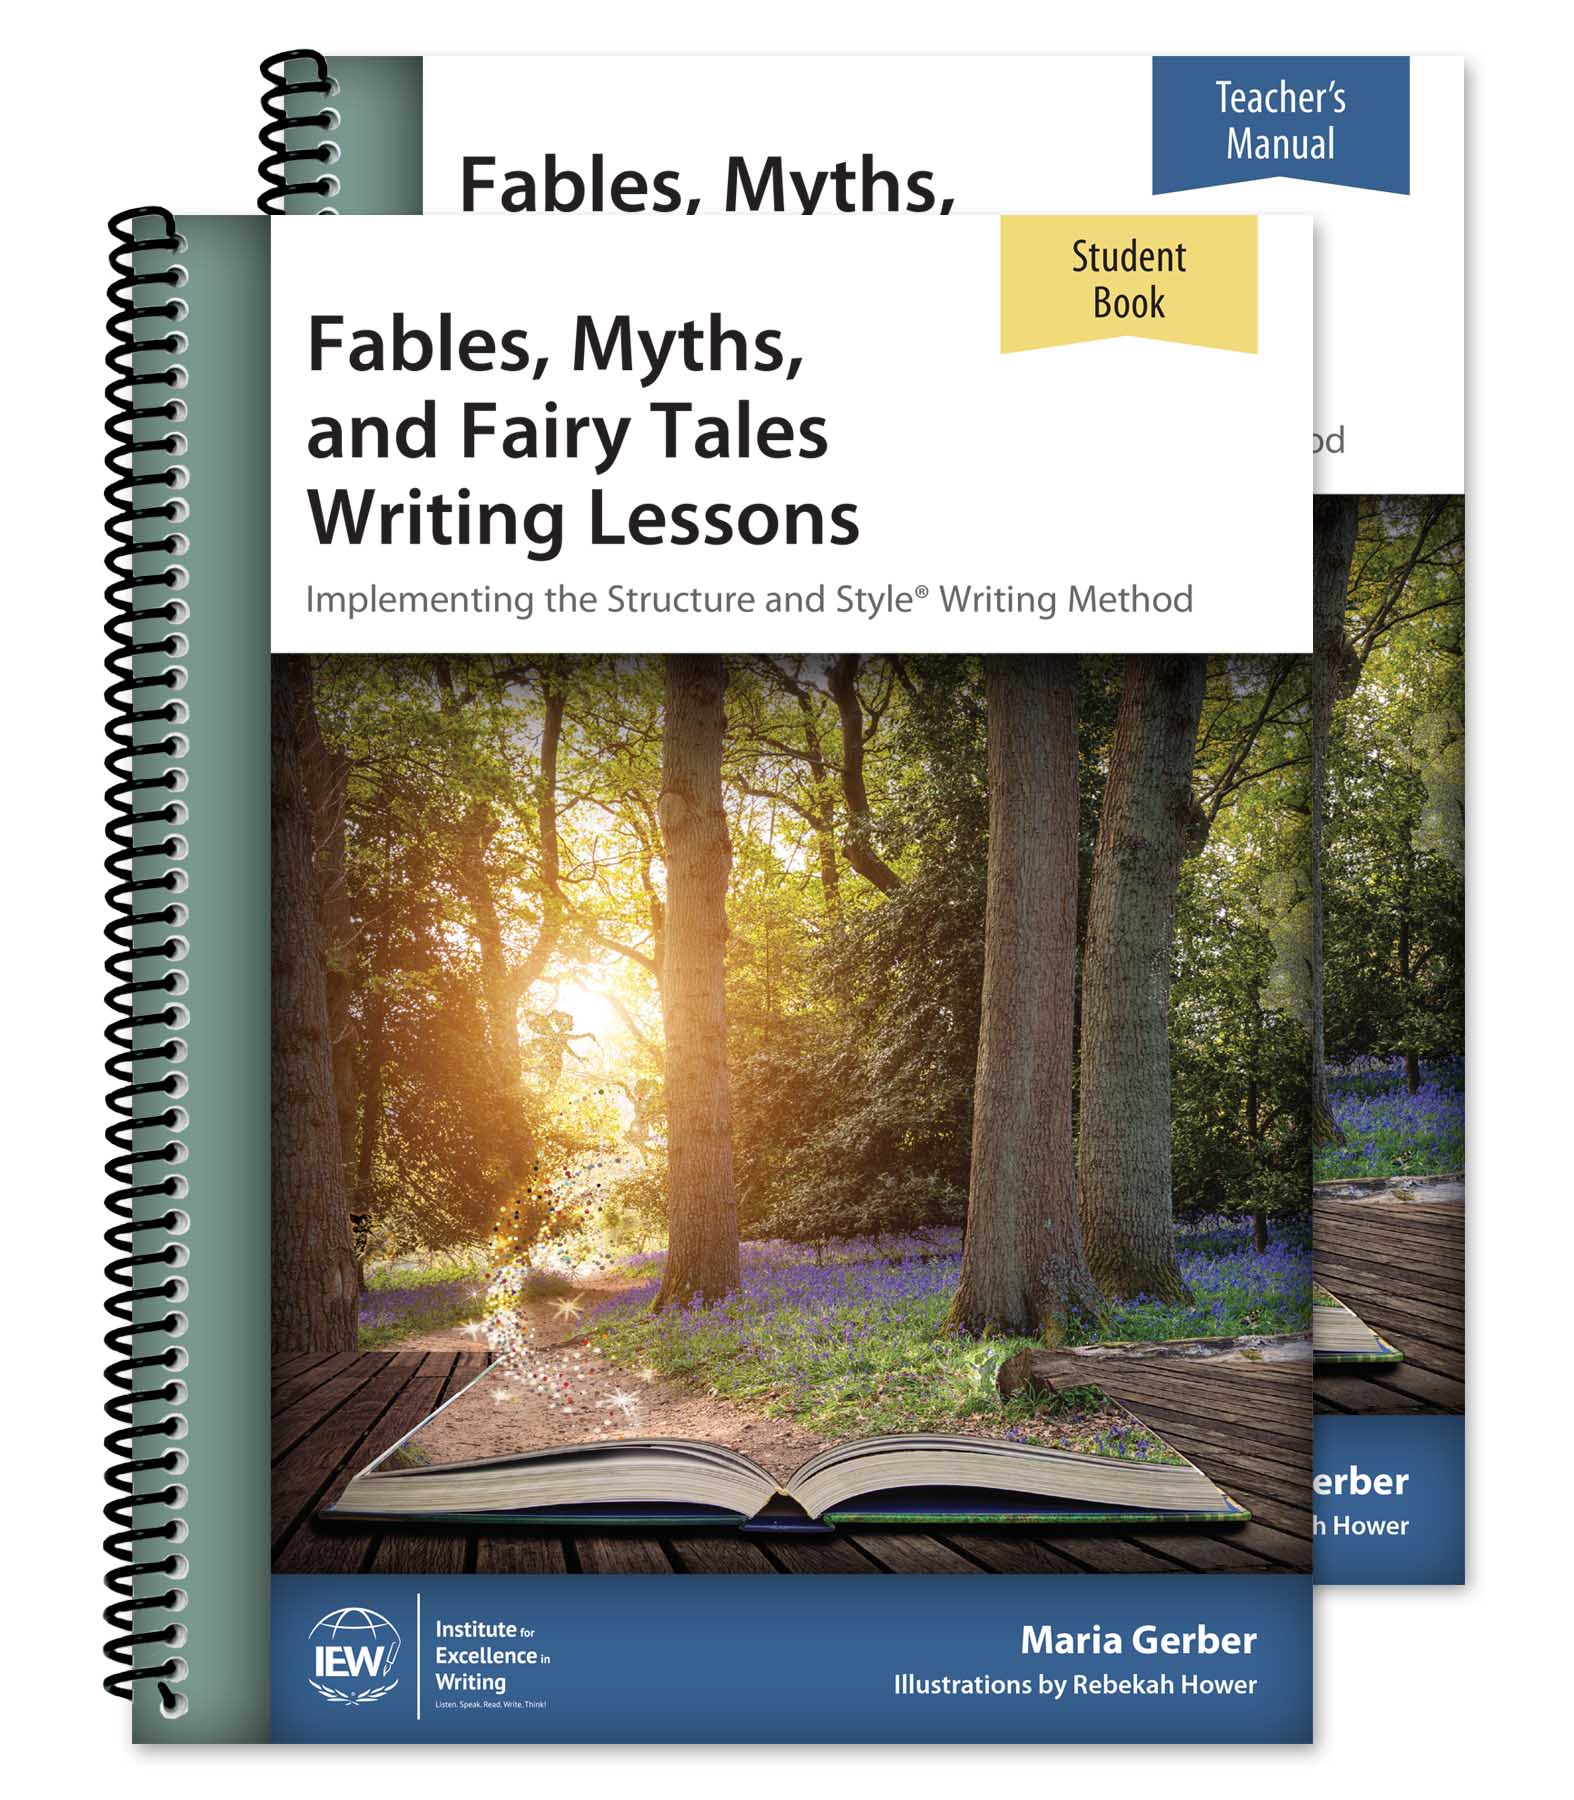 Fables, Myths, and Fairy Tales Writing Lessons [Teacher/Student Combo]